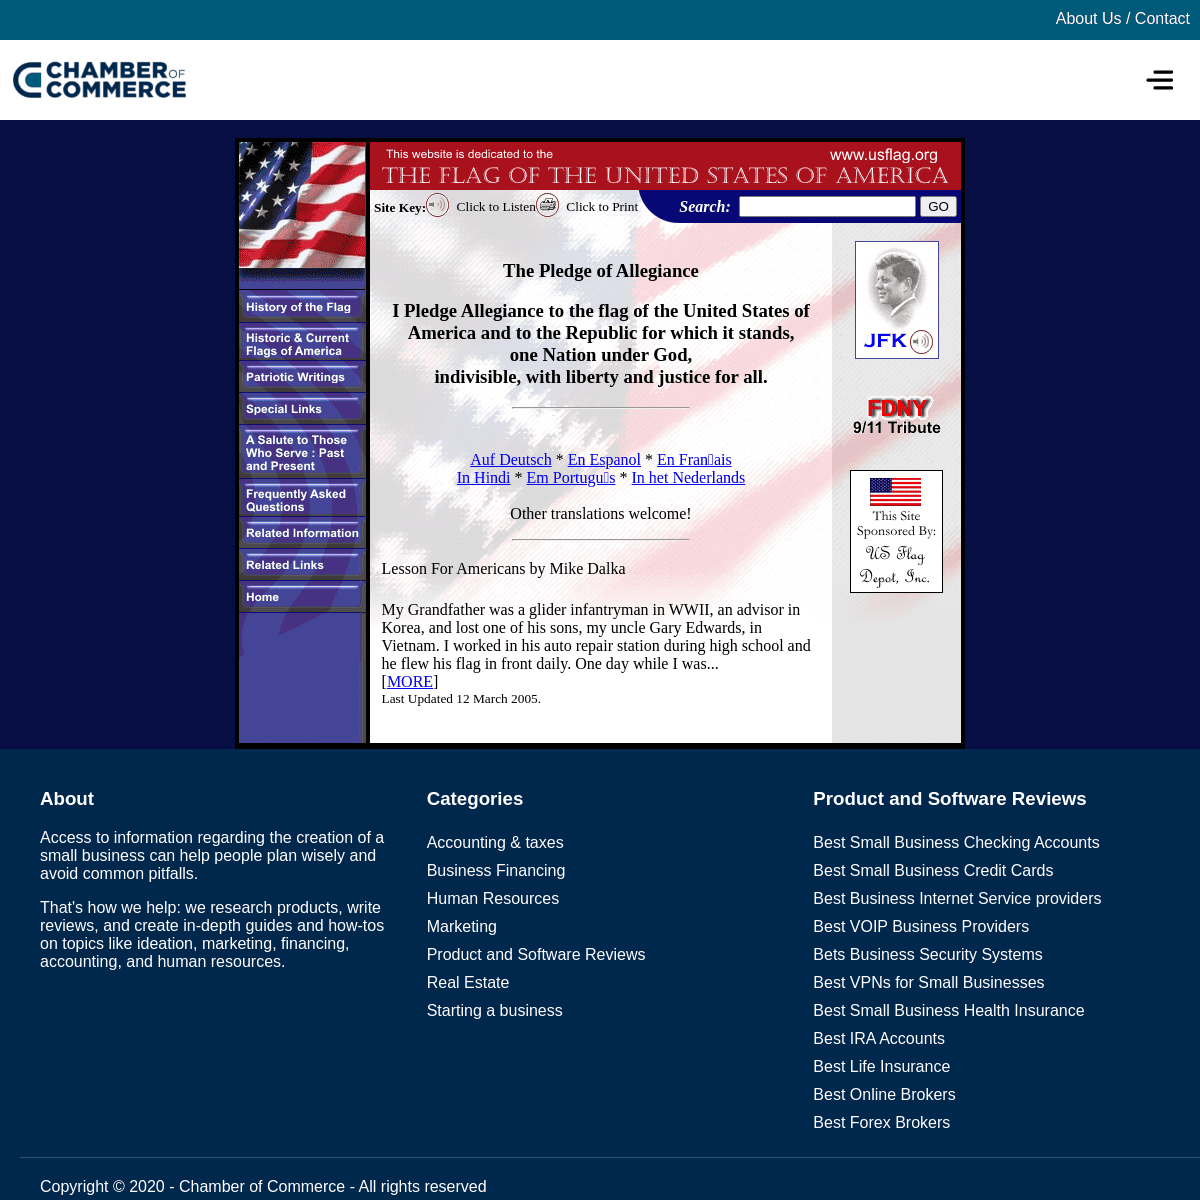 A complete backup of https://usflag.org